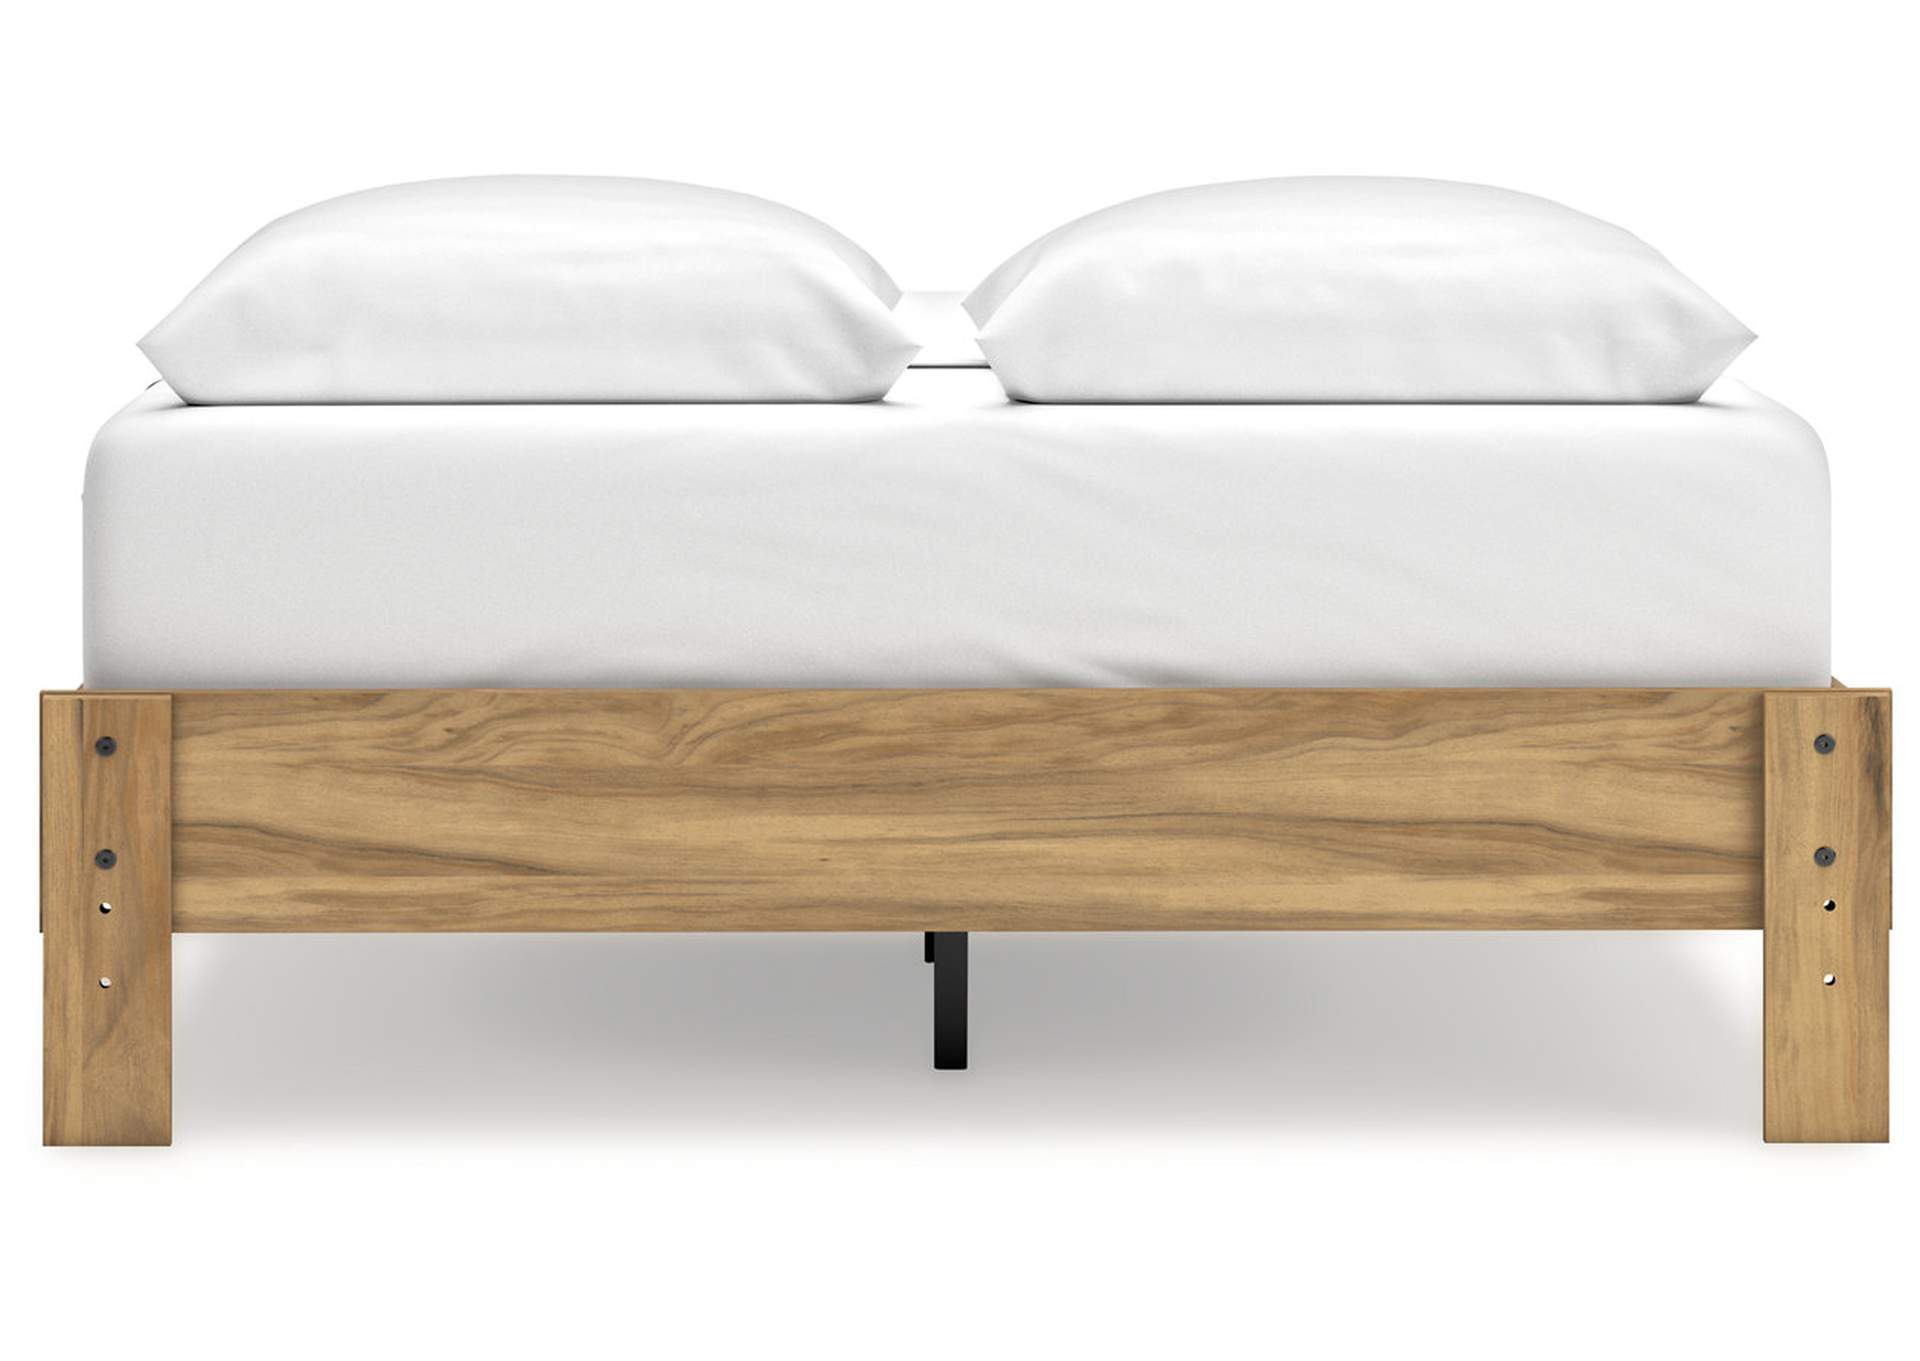 Bermacy Queen Platform Bed,Signature Design By Ashley